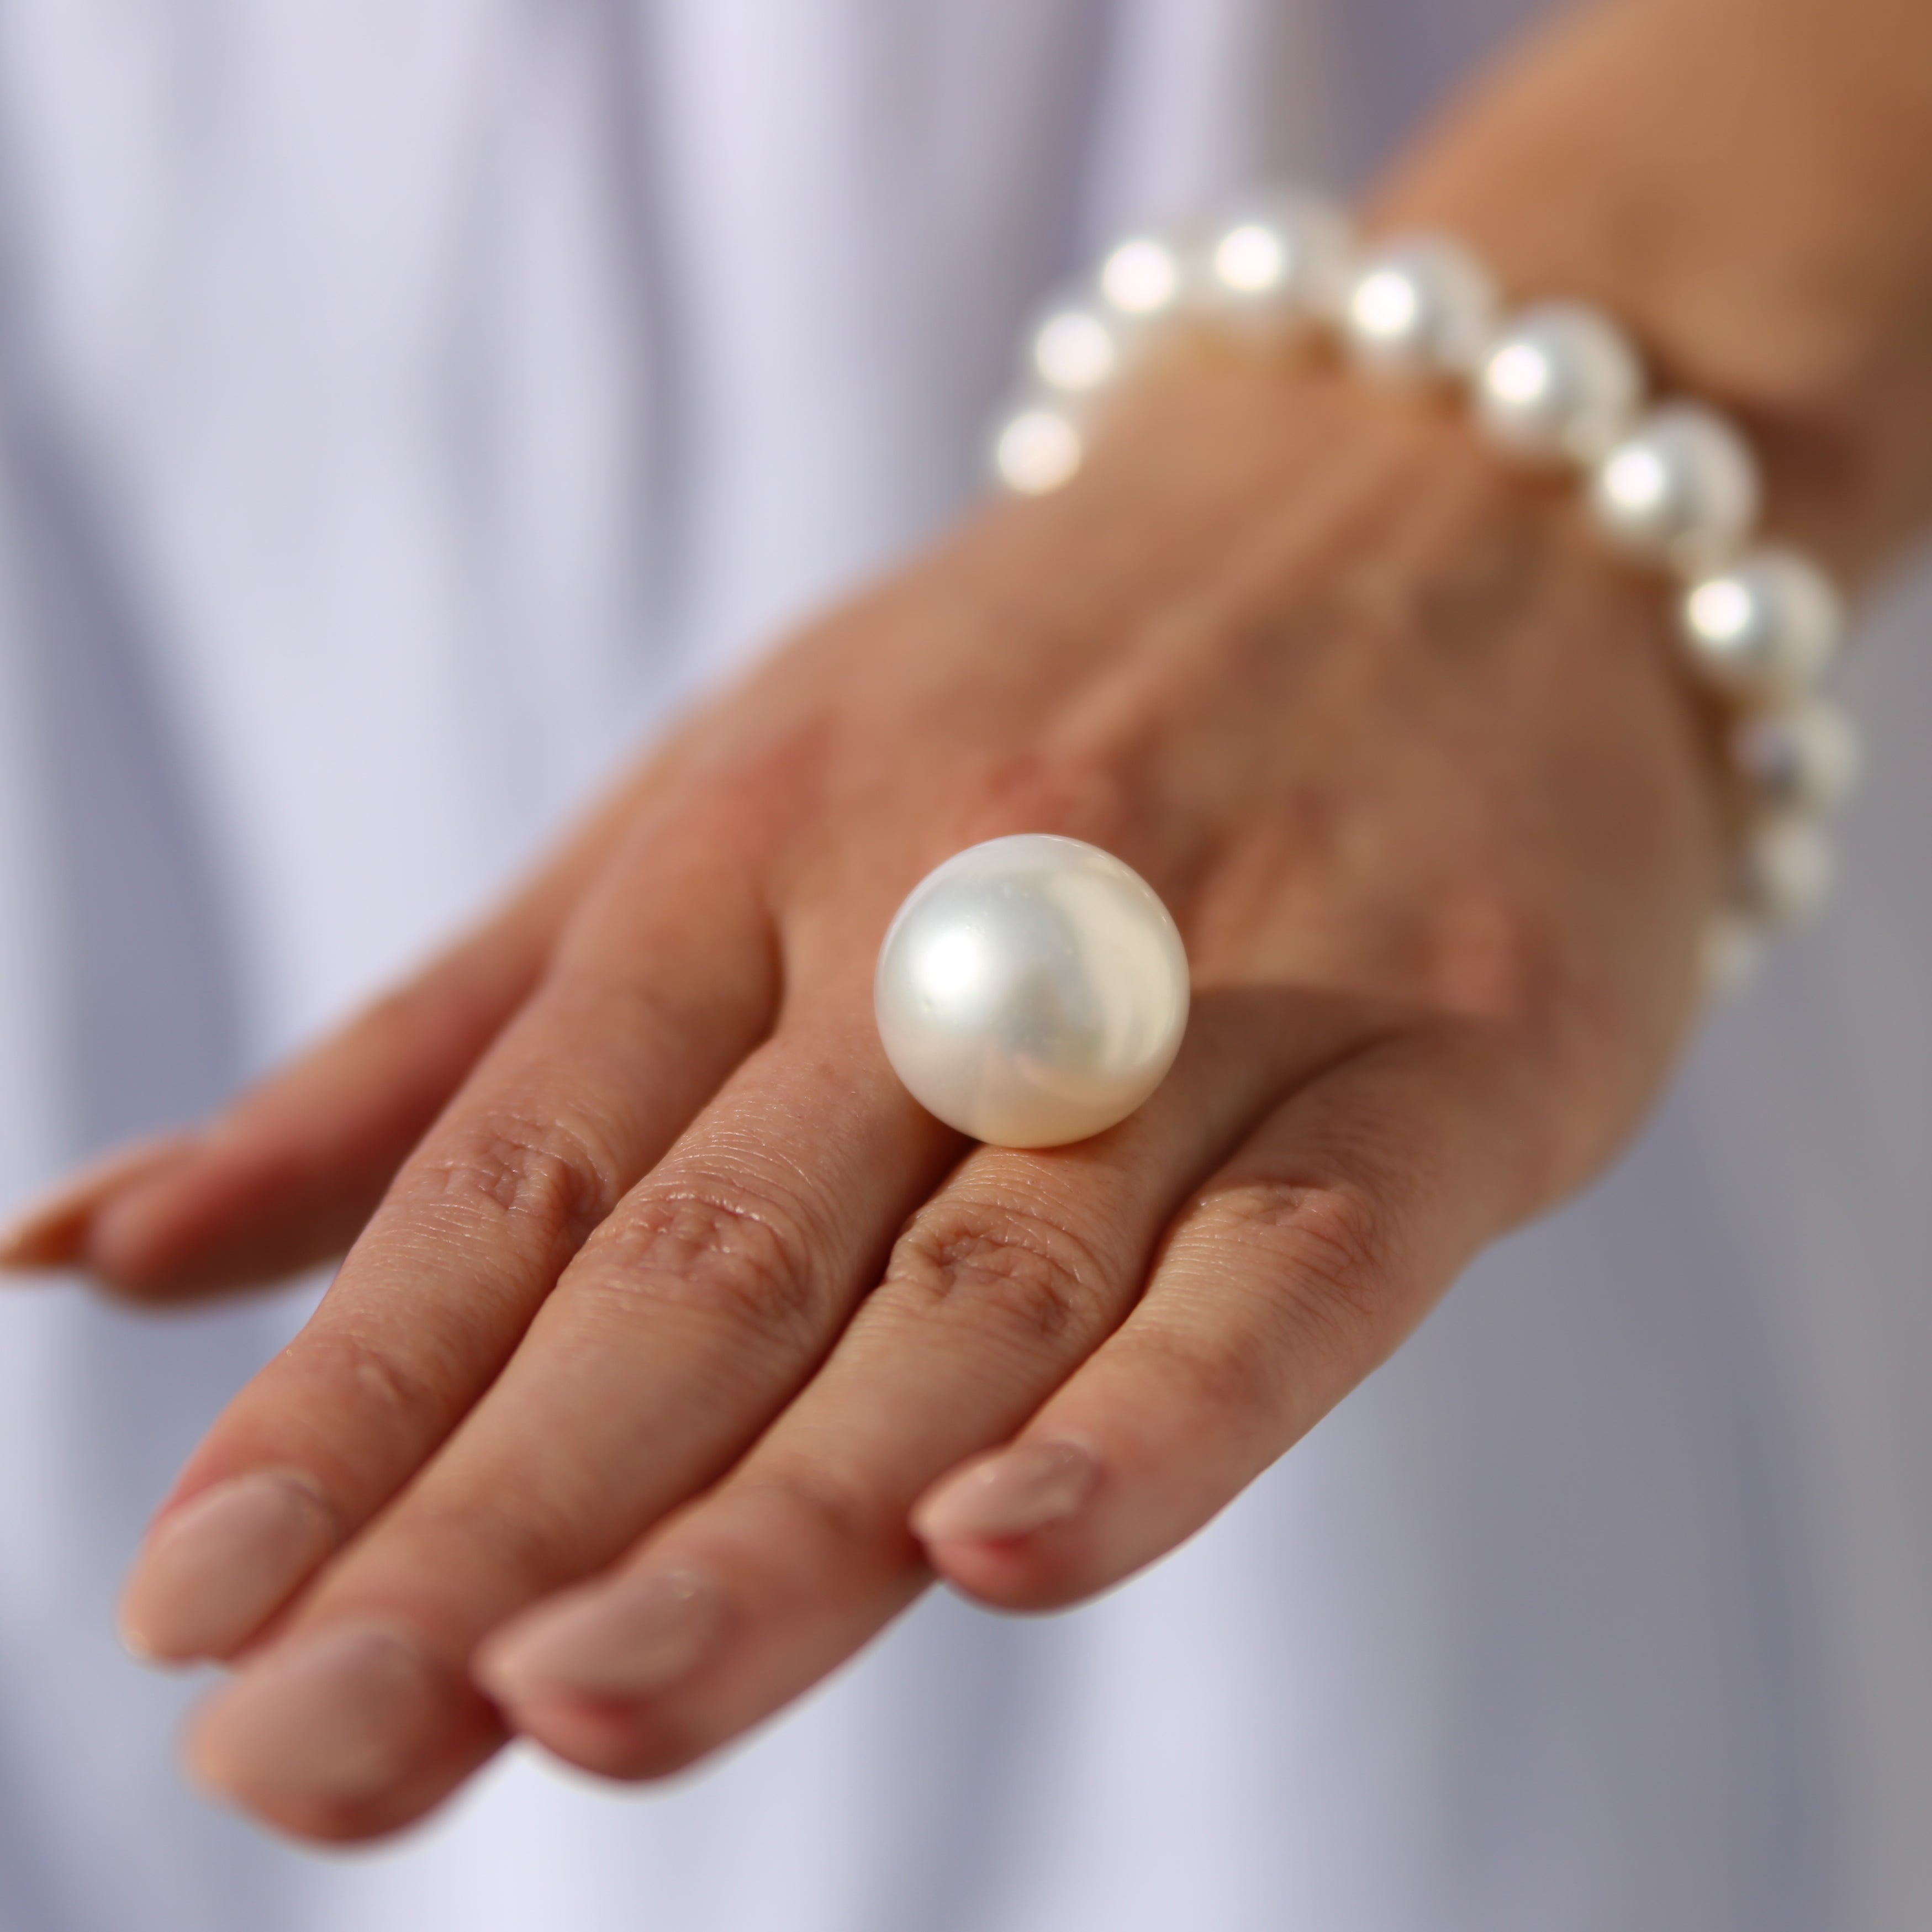 The Month of The Pearl and The Fascinating History of Birthstones